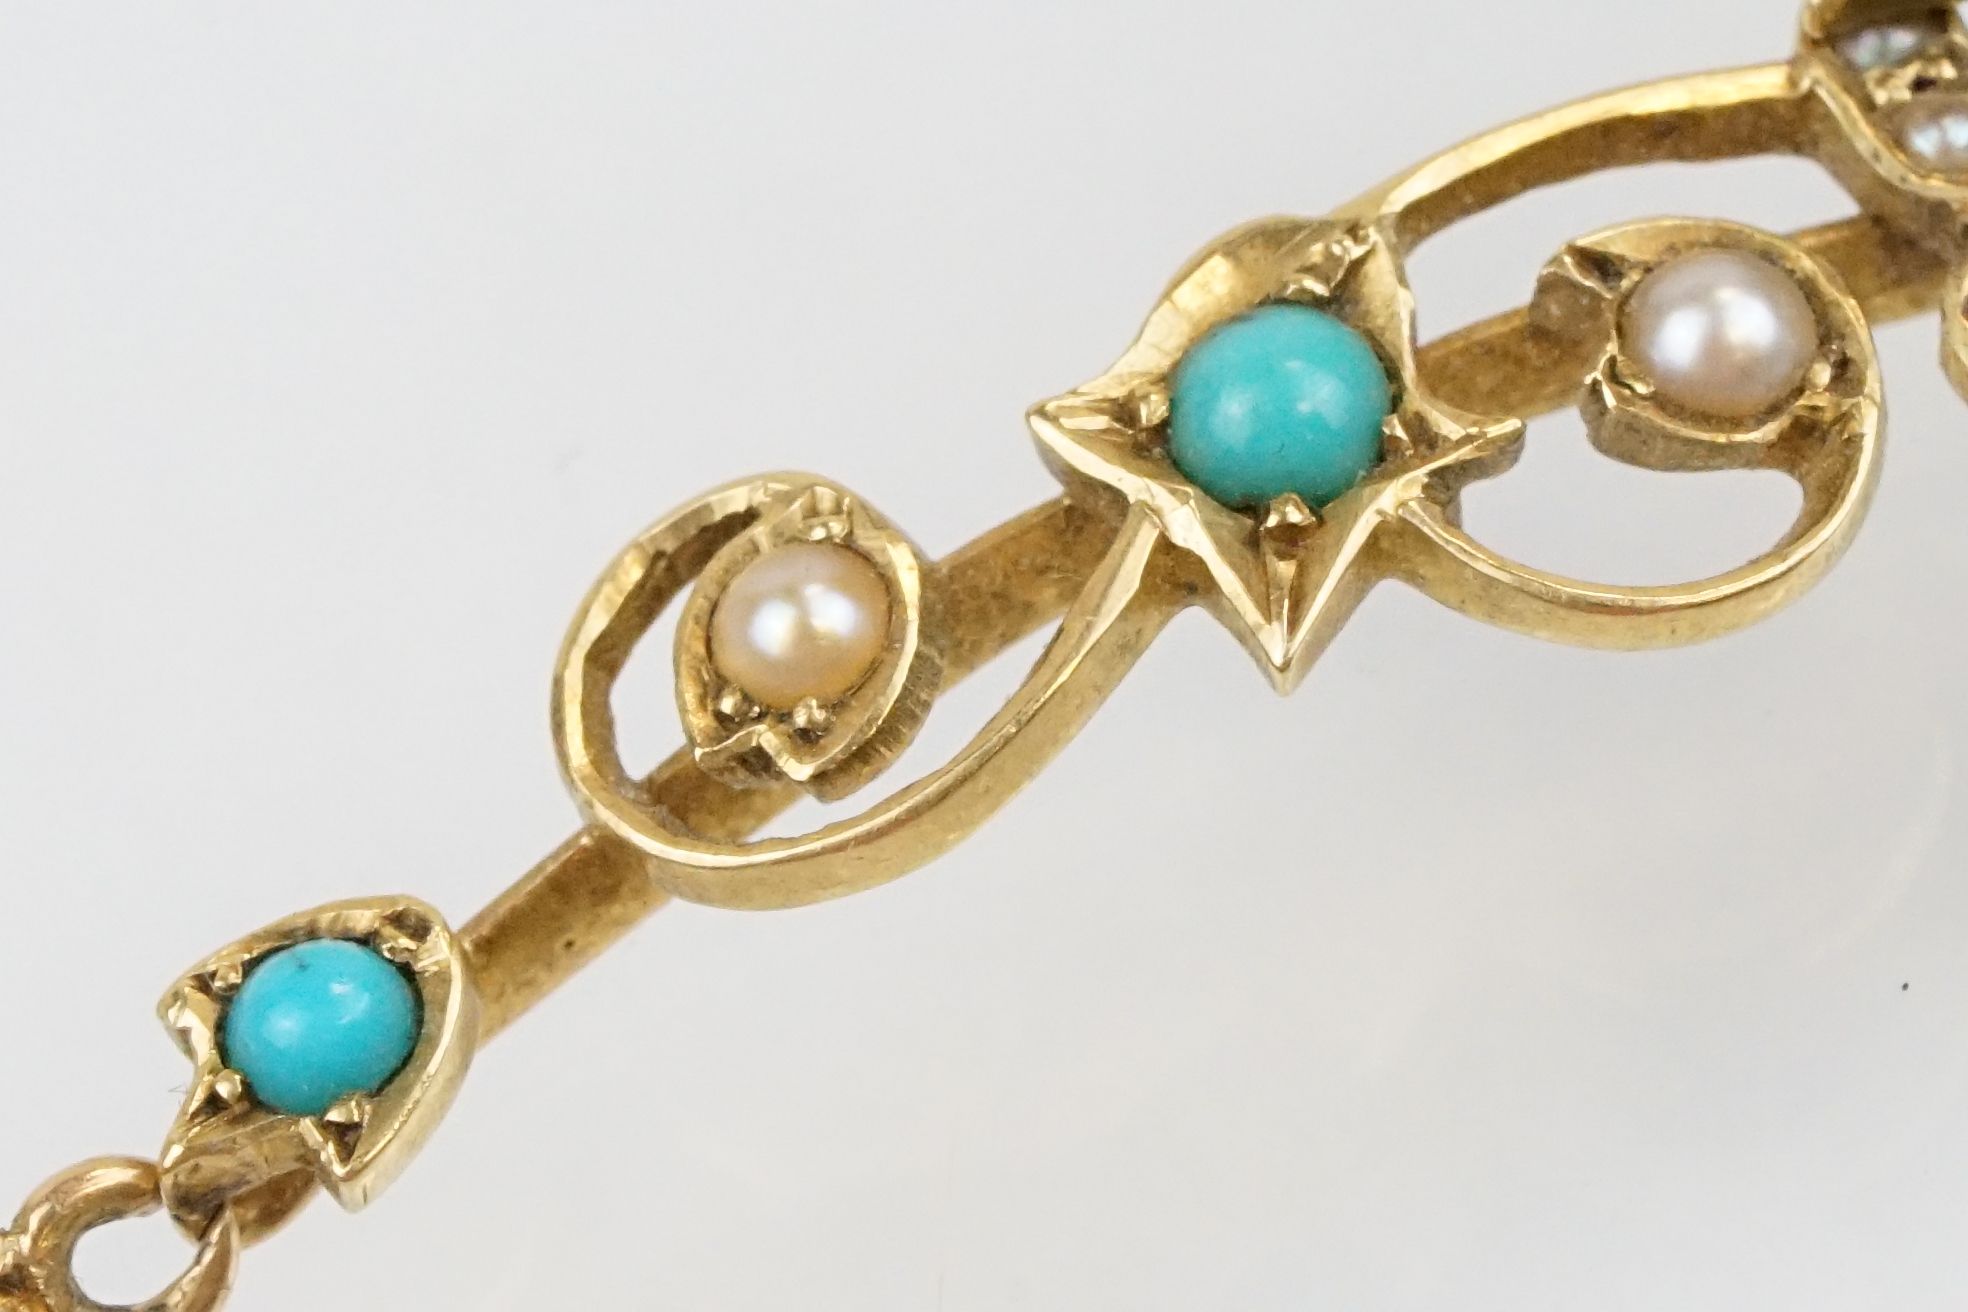 19th Century Victorian 15ct gold, seed pearl and turquoise collar necklace. The floral articulated - Image 9 of 11